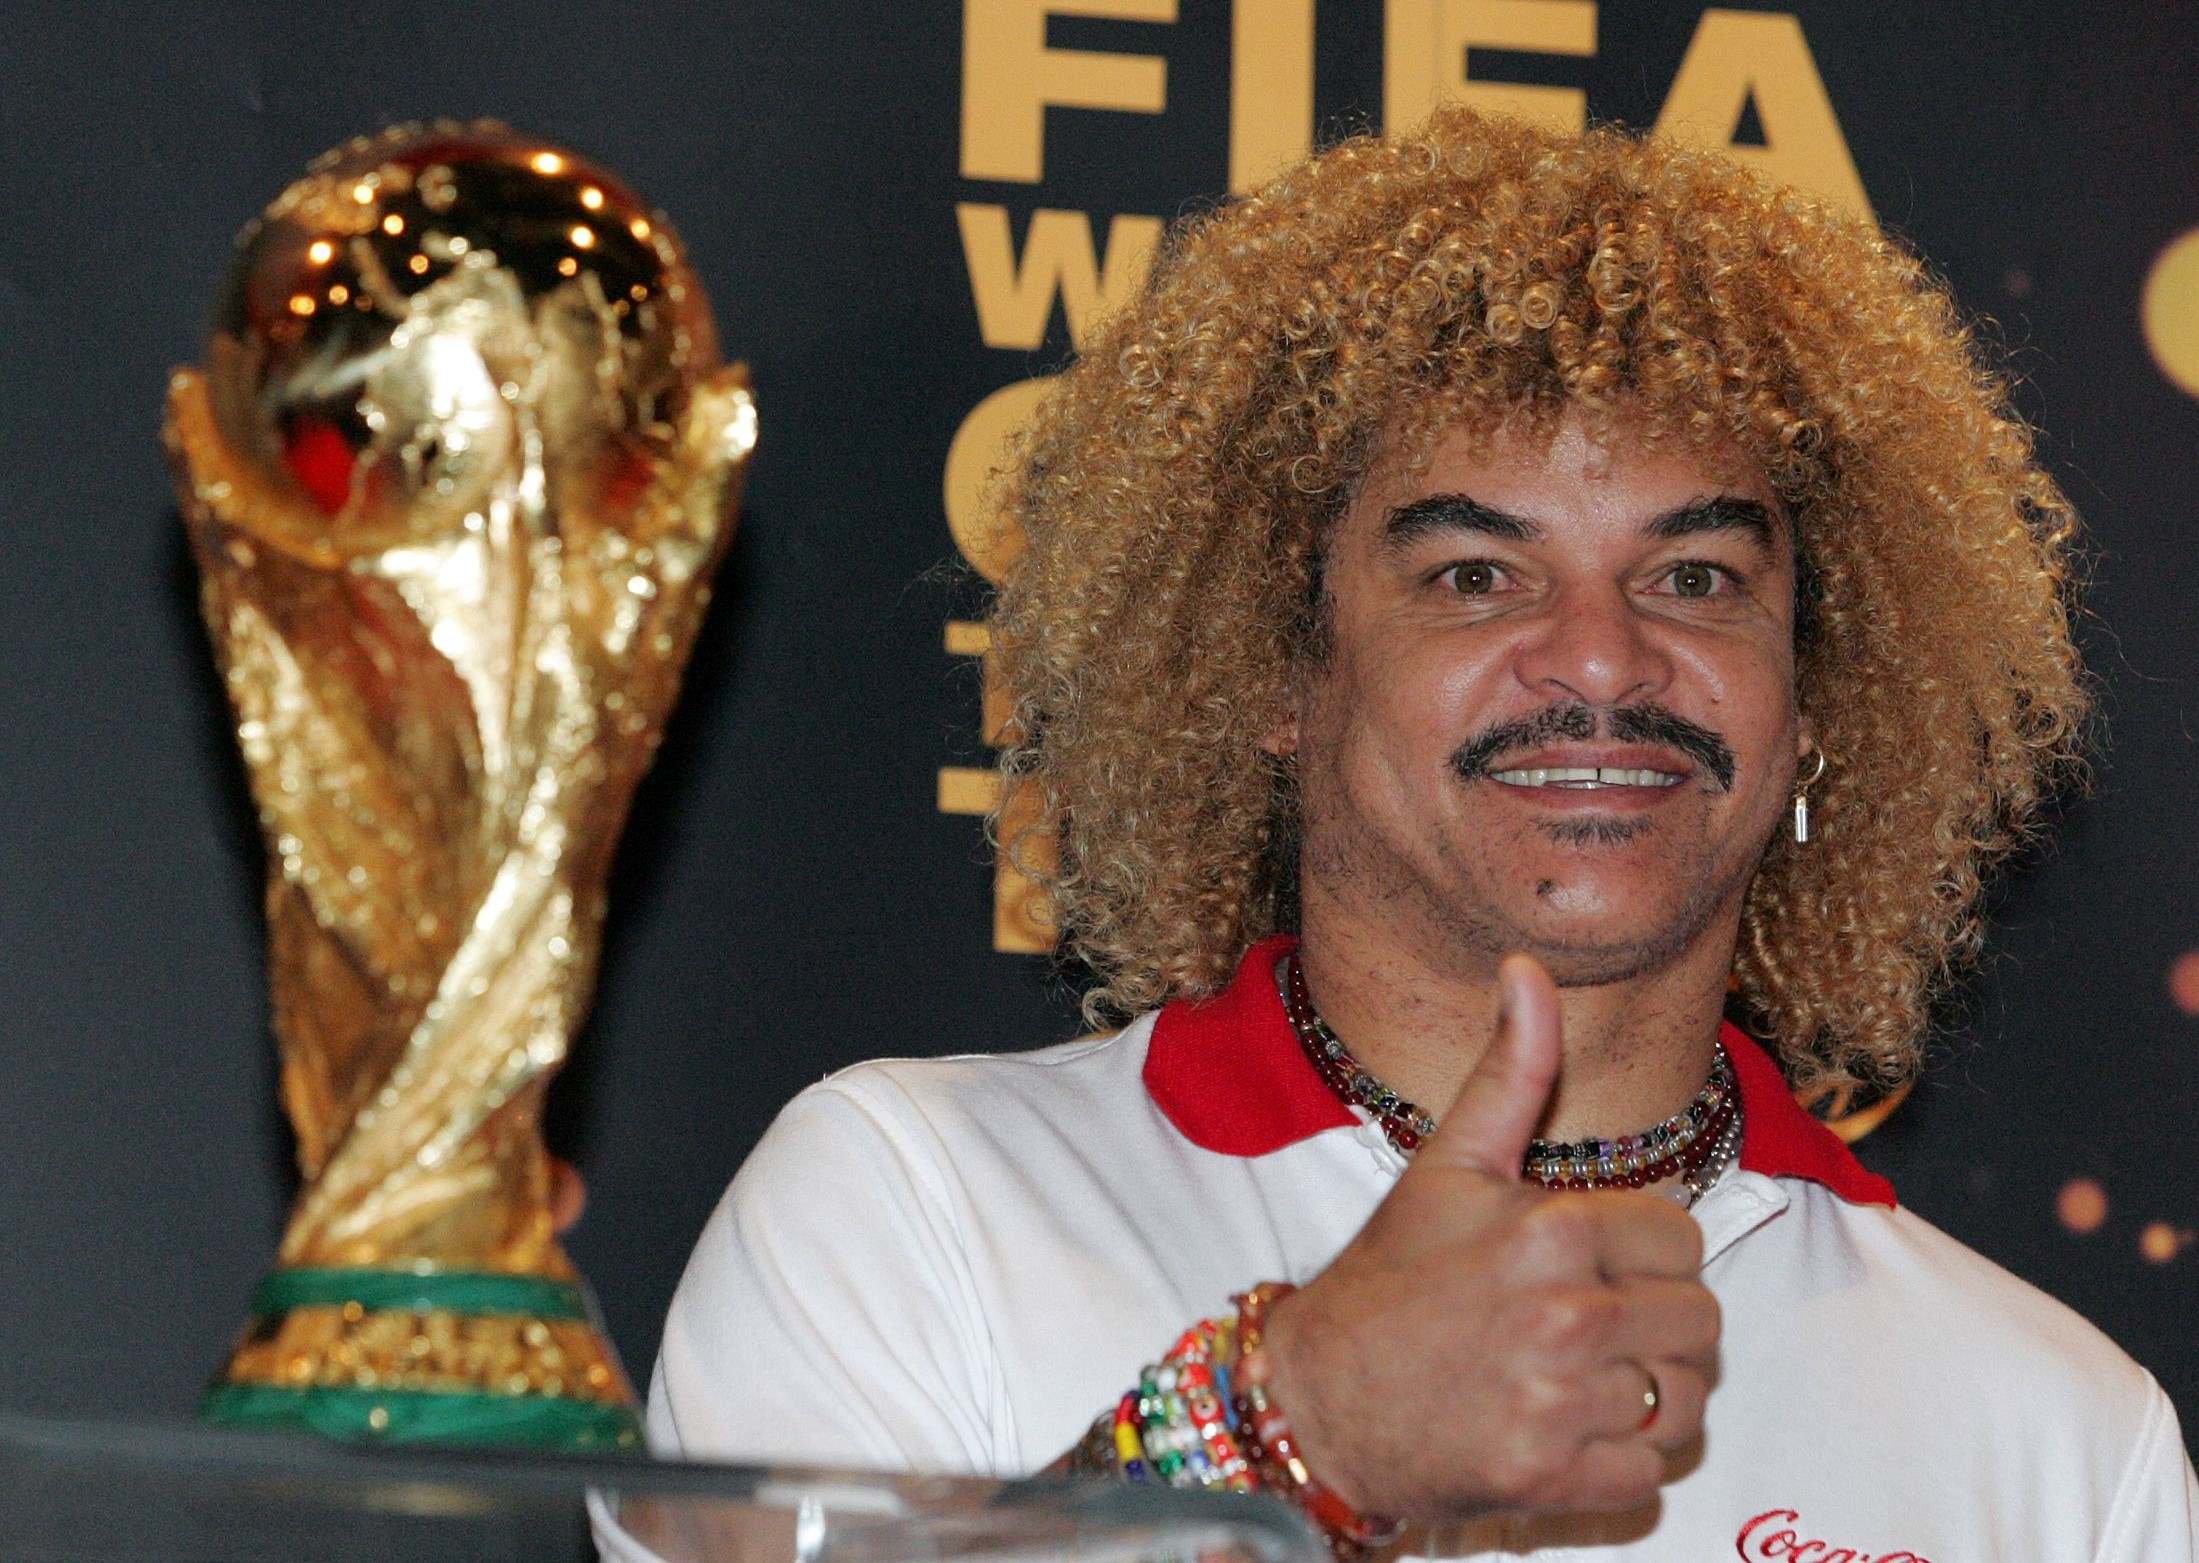 16 Facts About Carlos Valderrama - Facts.net